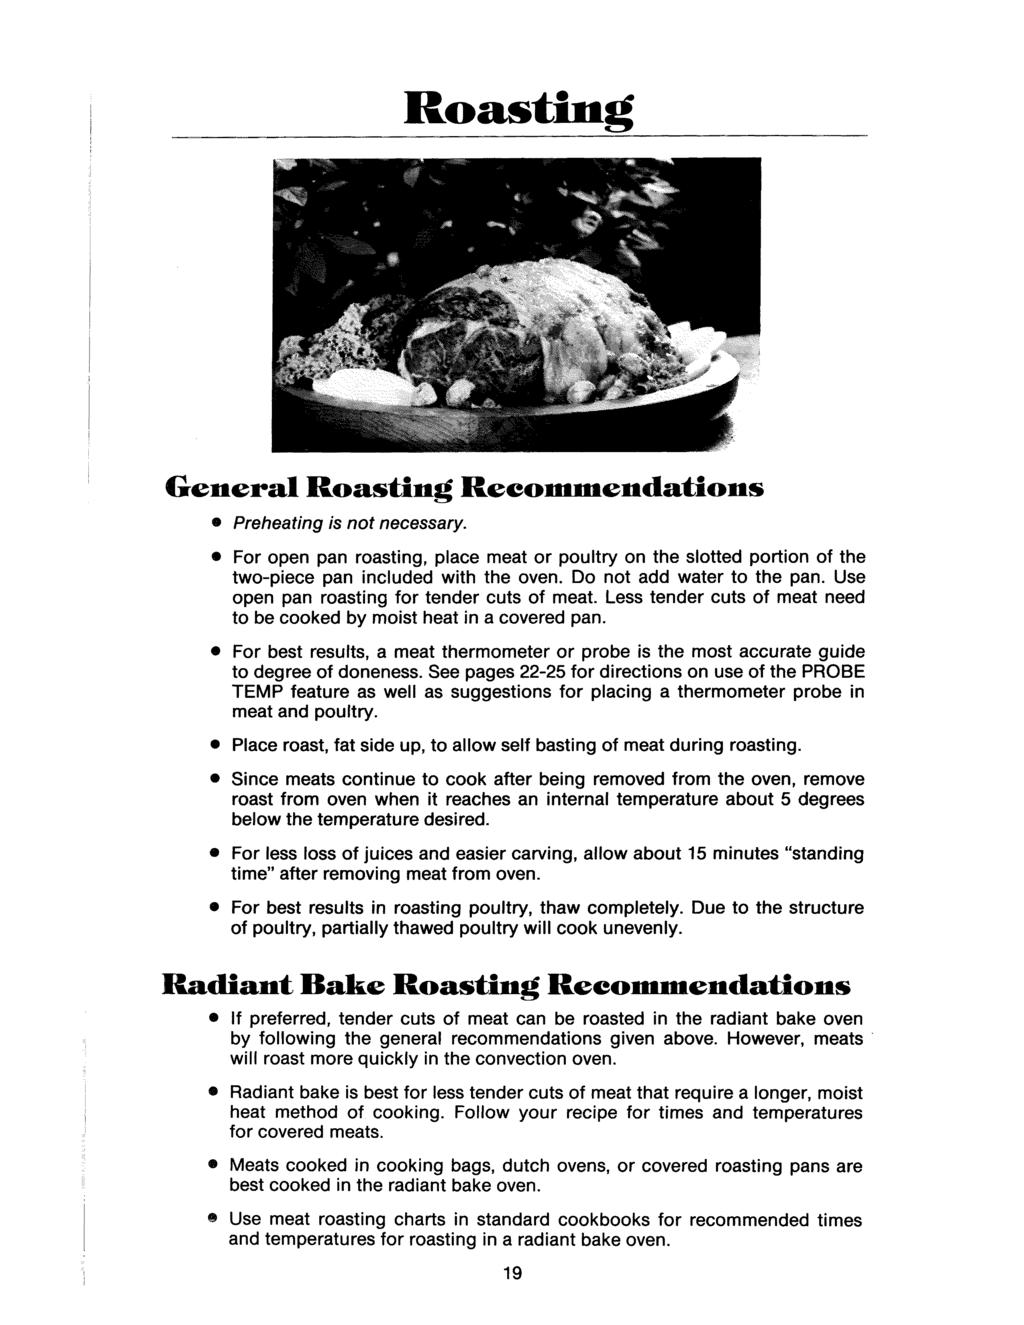 Roasting General Roasting Recommendations Preheating is not necessary. o For open pan roasting, place meat or poultry on the slotted portion of the two-piece pan included with the oven.